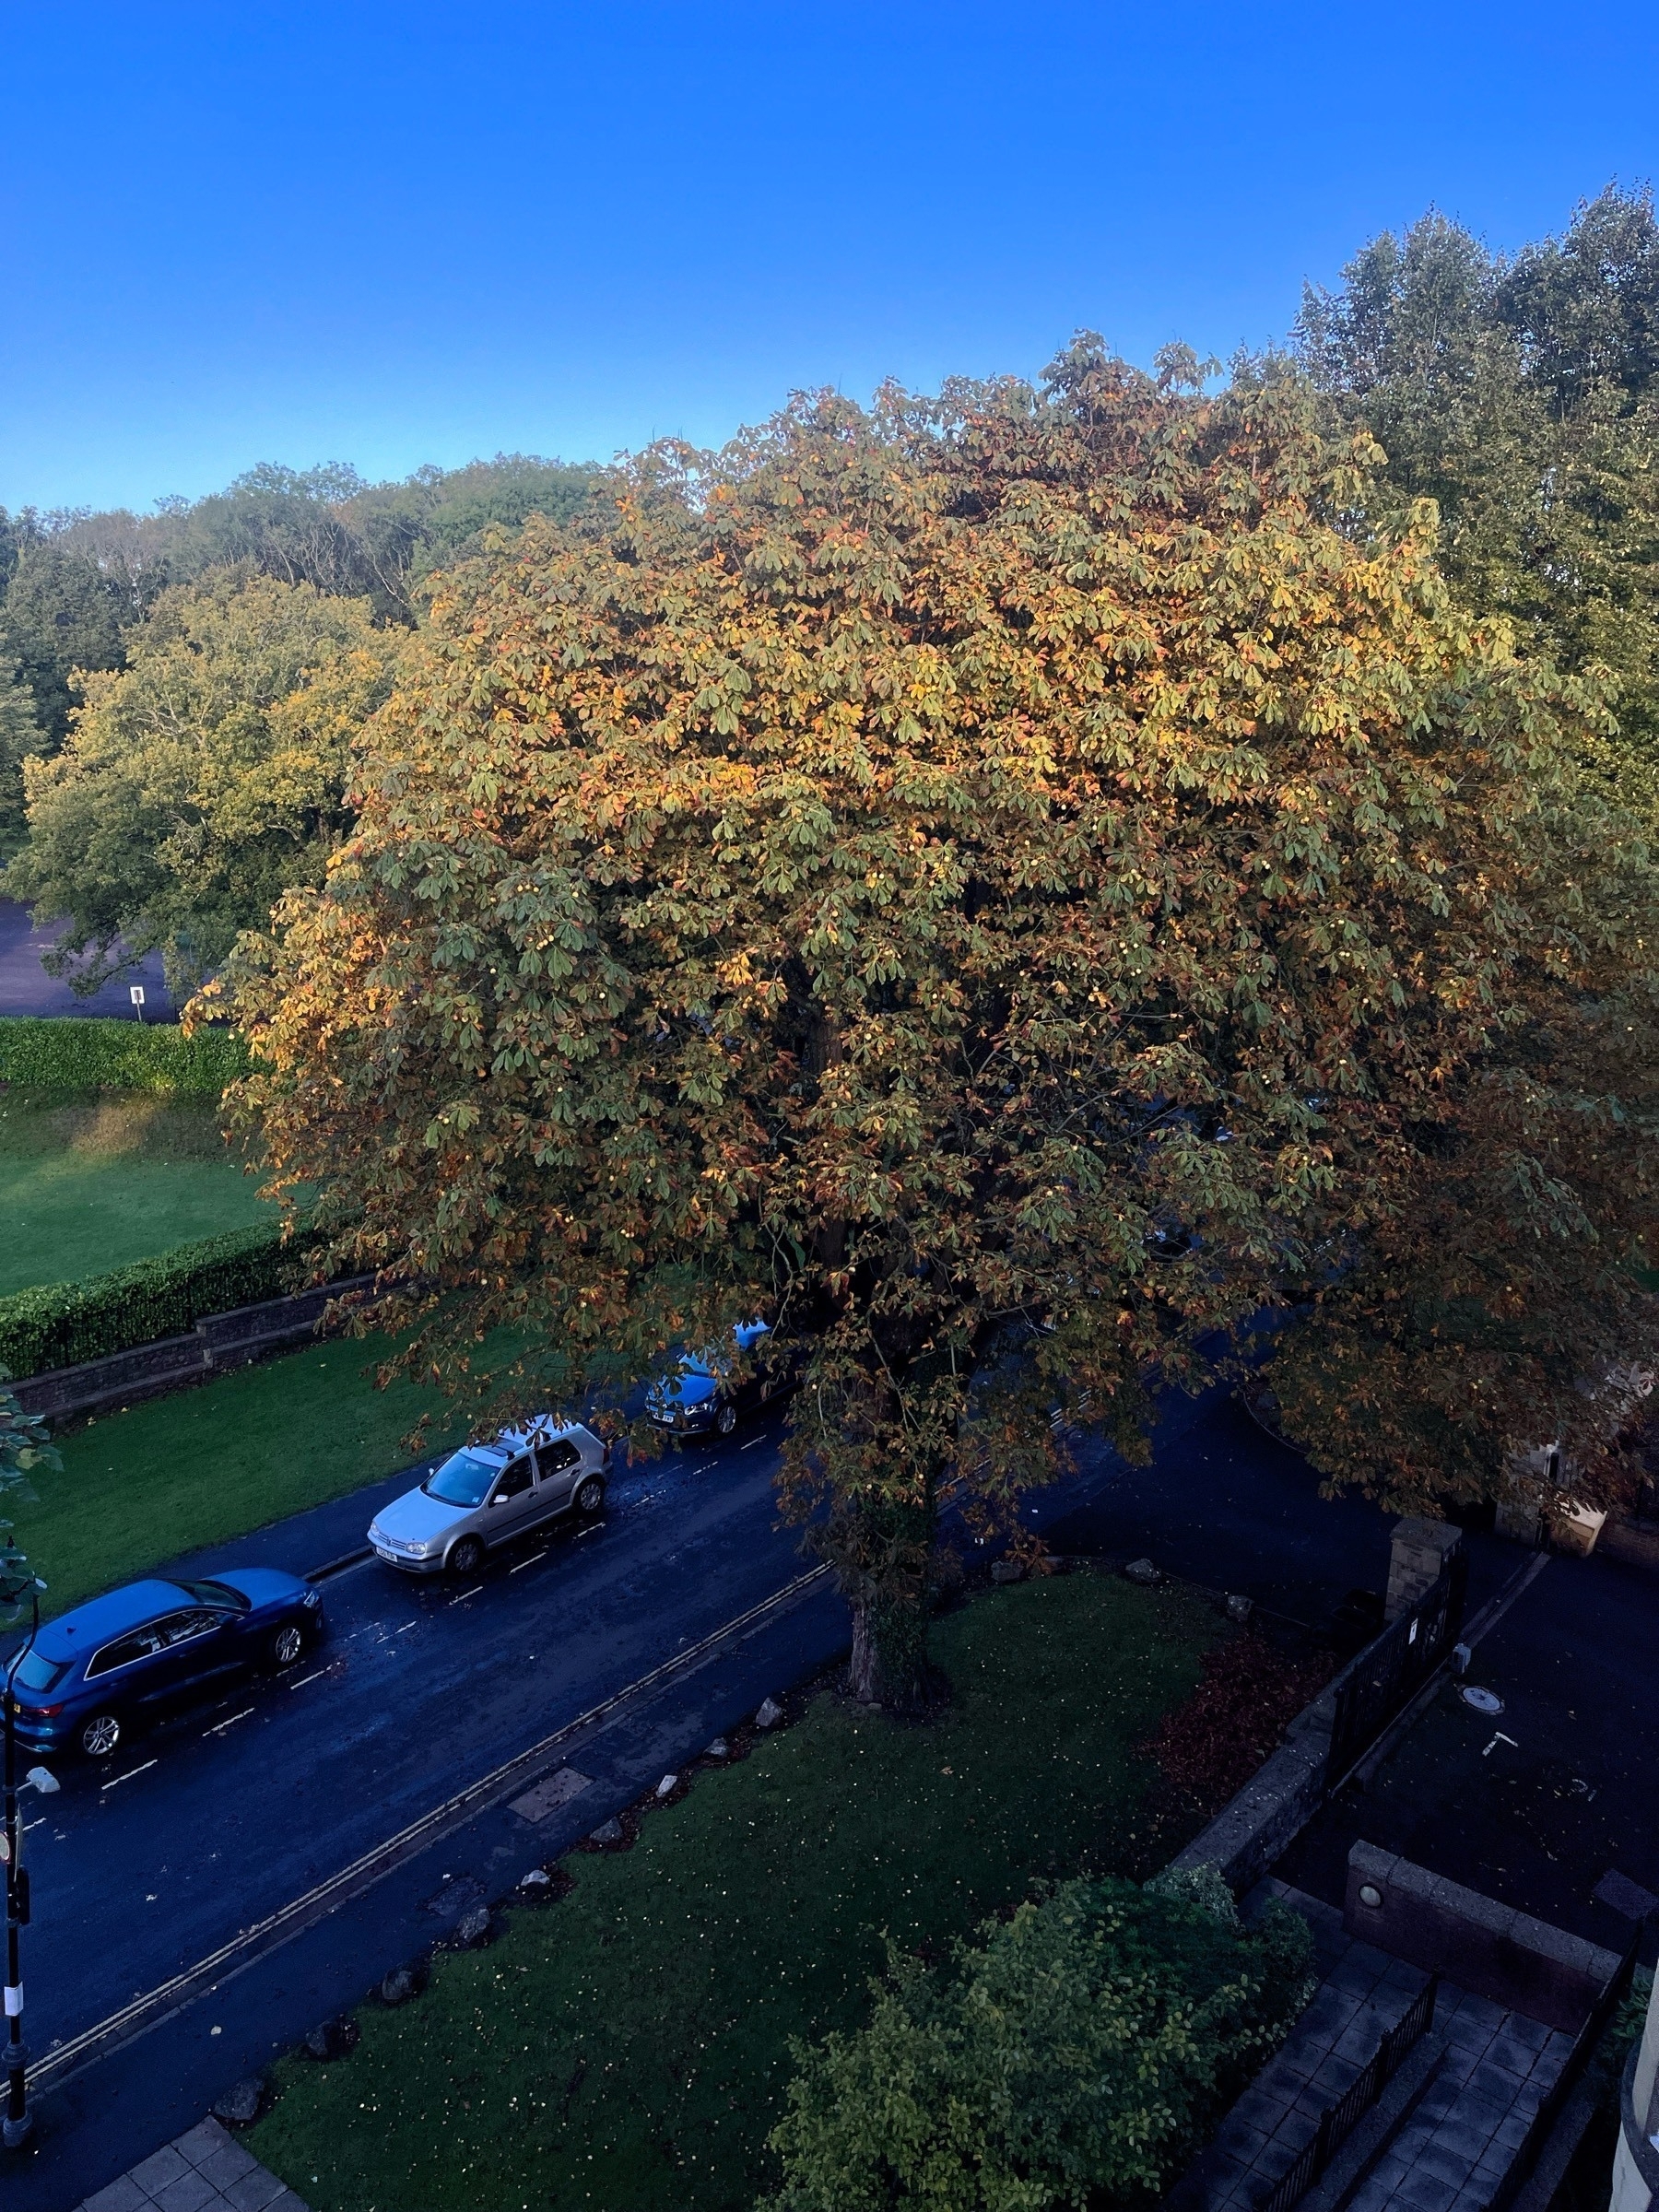 Fall colours as the leaves change on a Horse Chestnut tree in Bristol